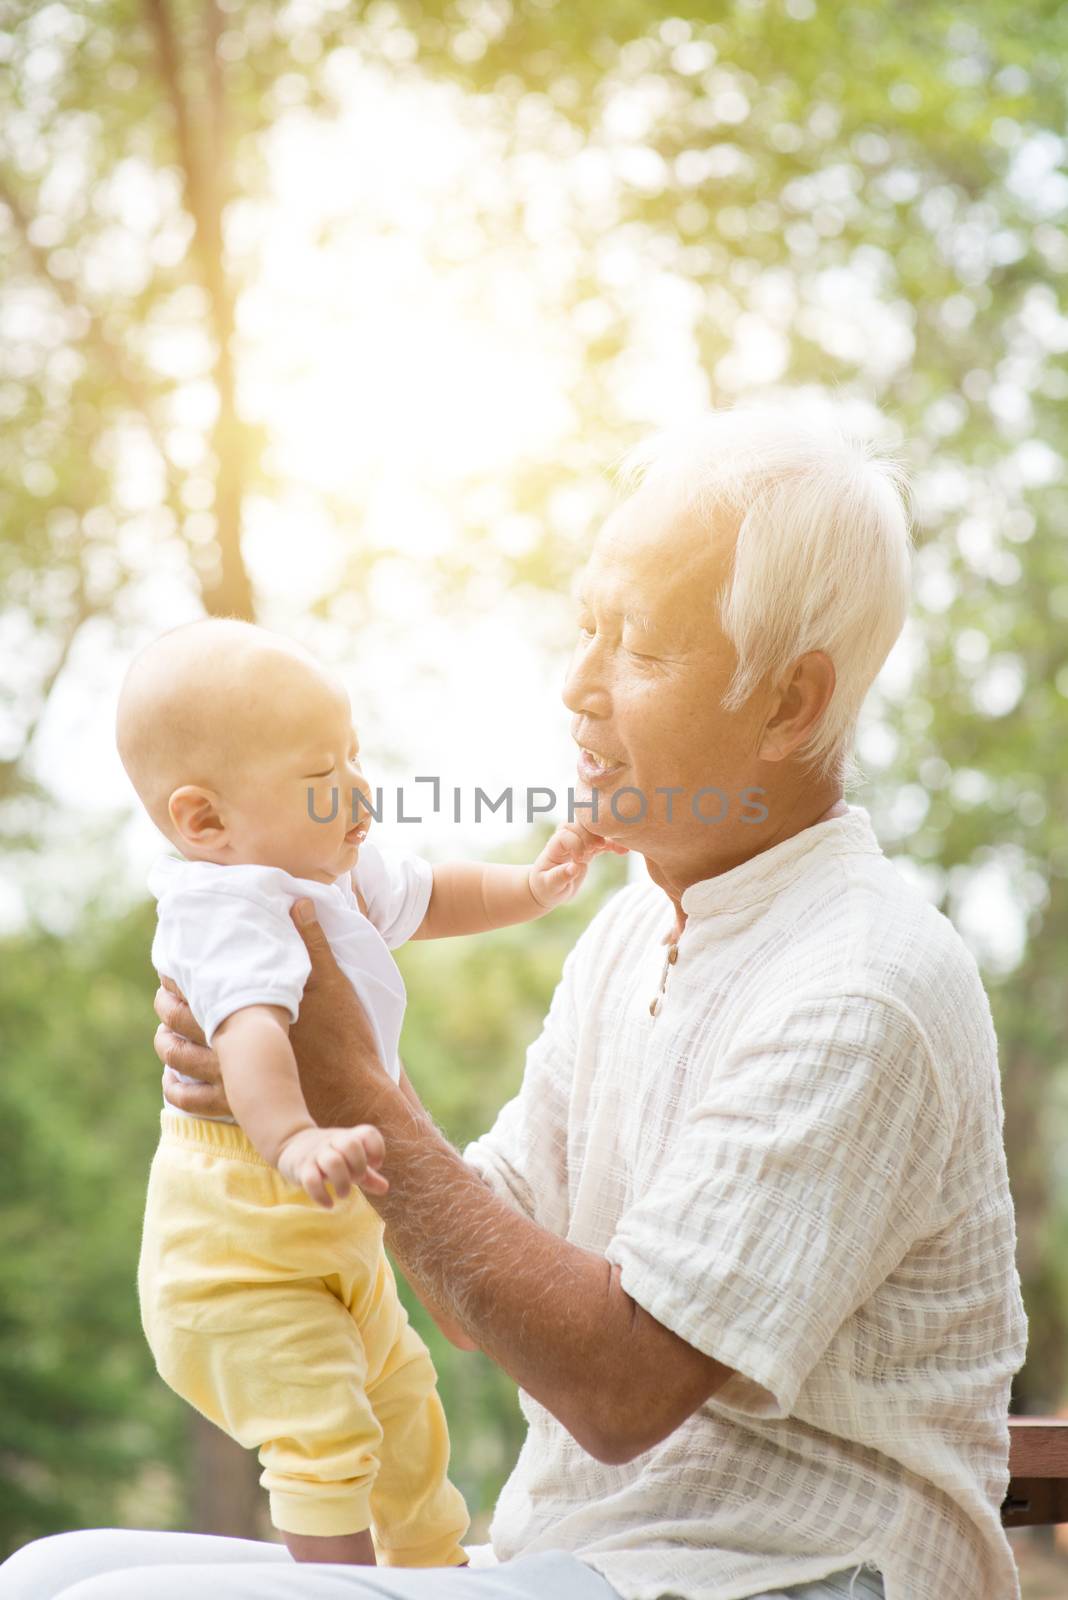 Grandfather playing with grandson at outdoor. by szefei